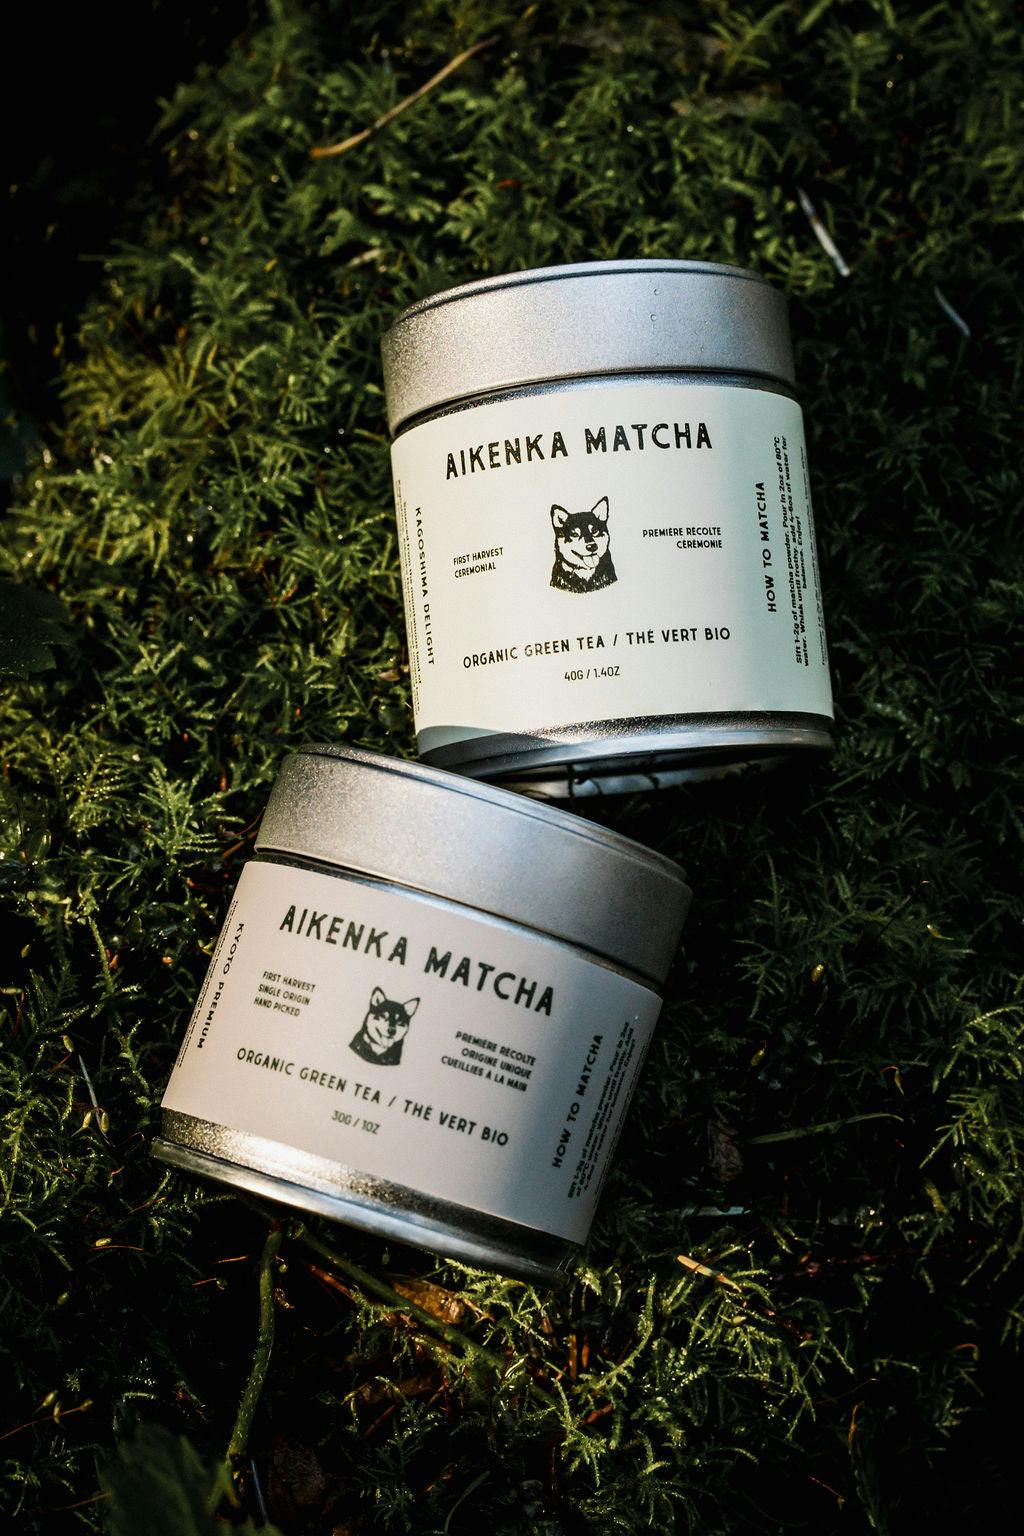 30g and 40g matcha tin cans in the forest, Aikenka Matcha